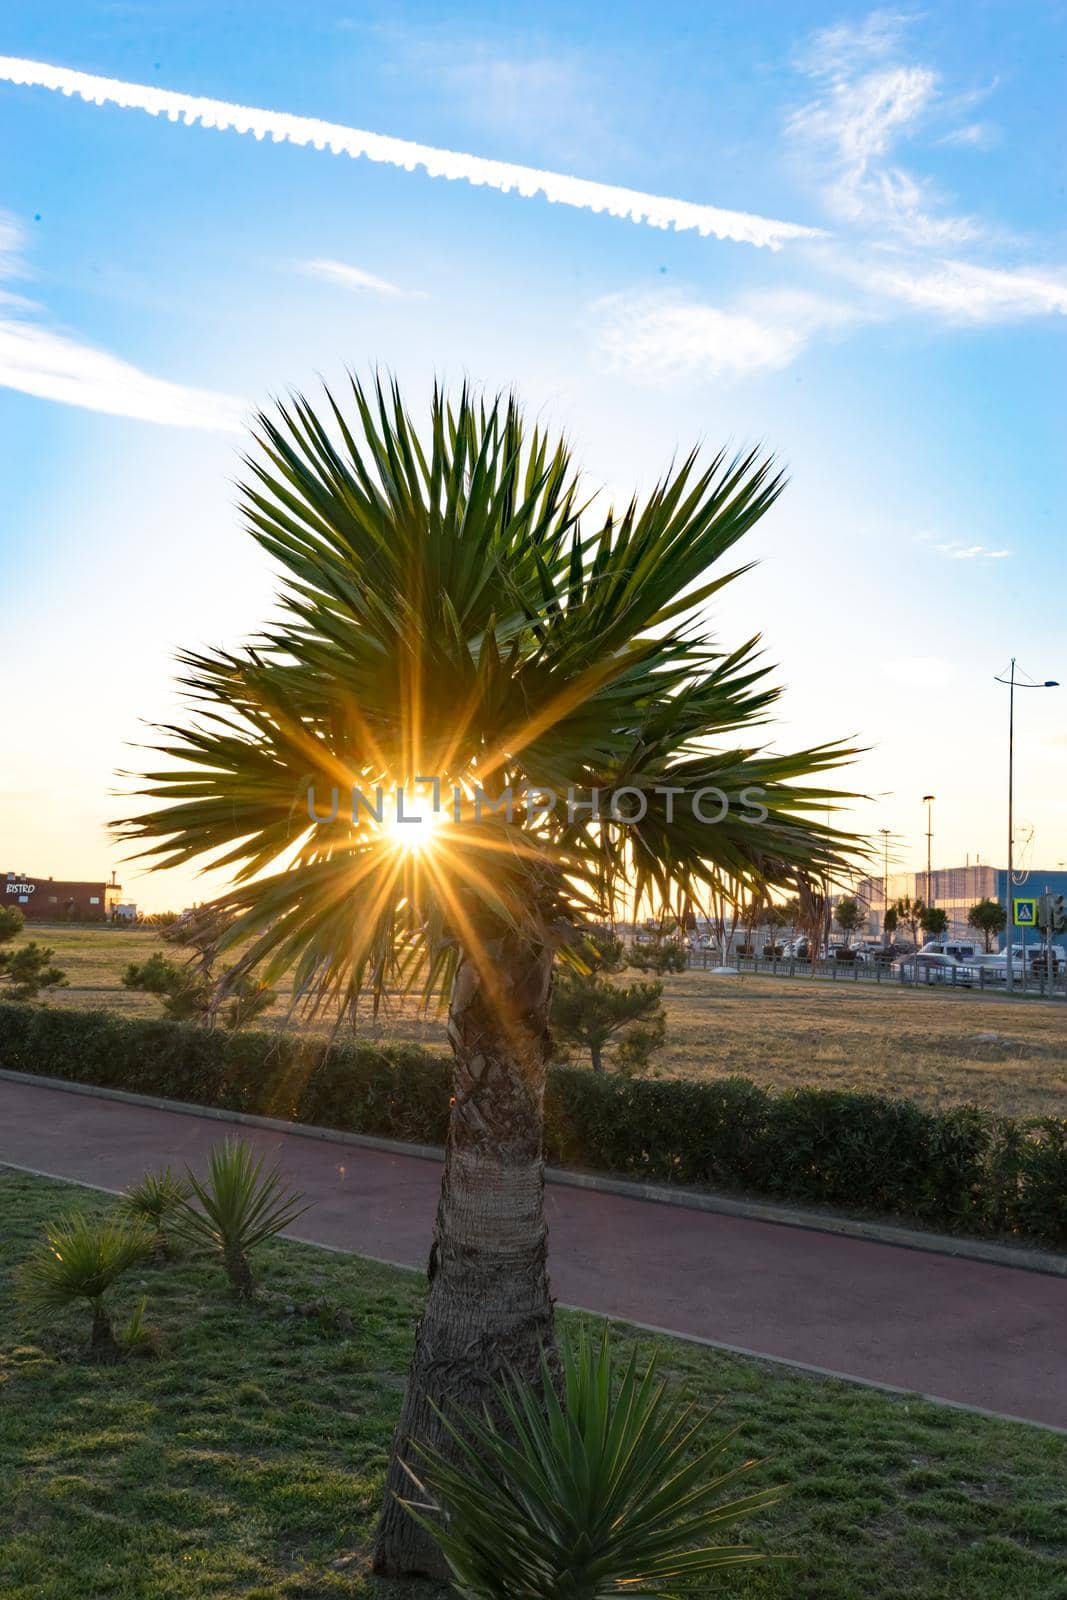 The sun shines through the leaves of a palm tree against the urban landscape by Vvicca